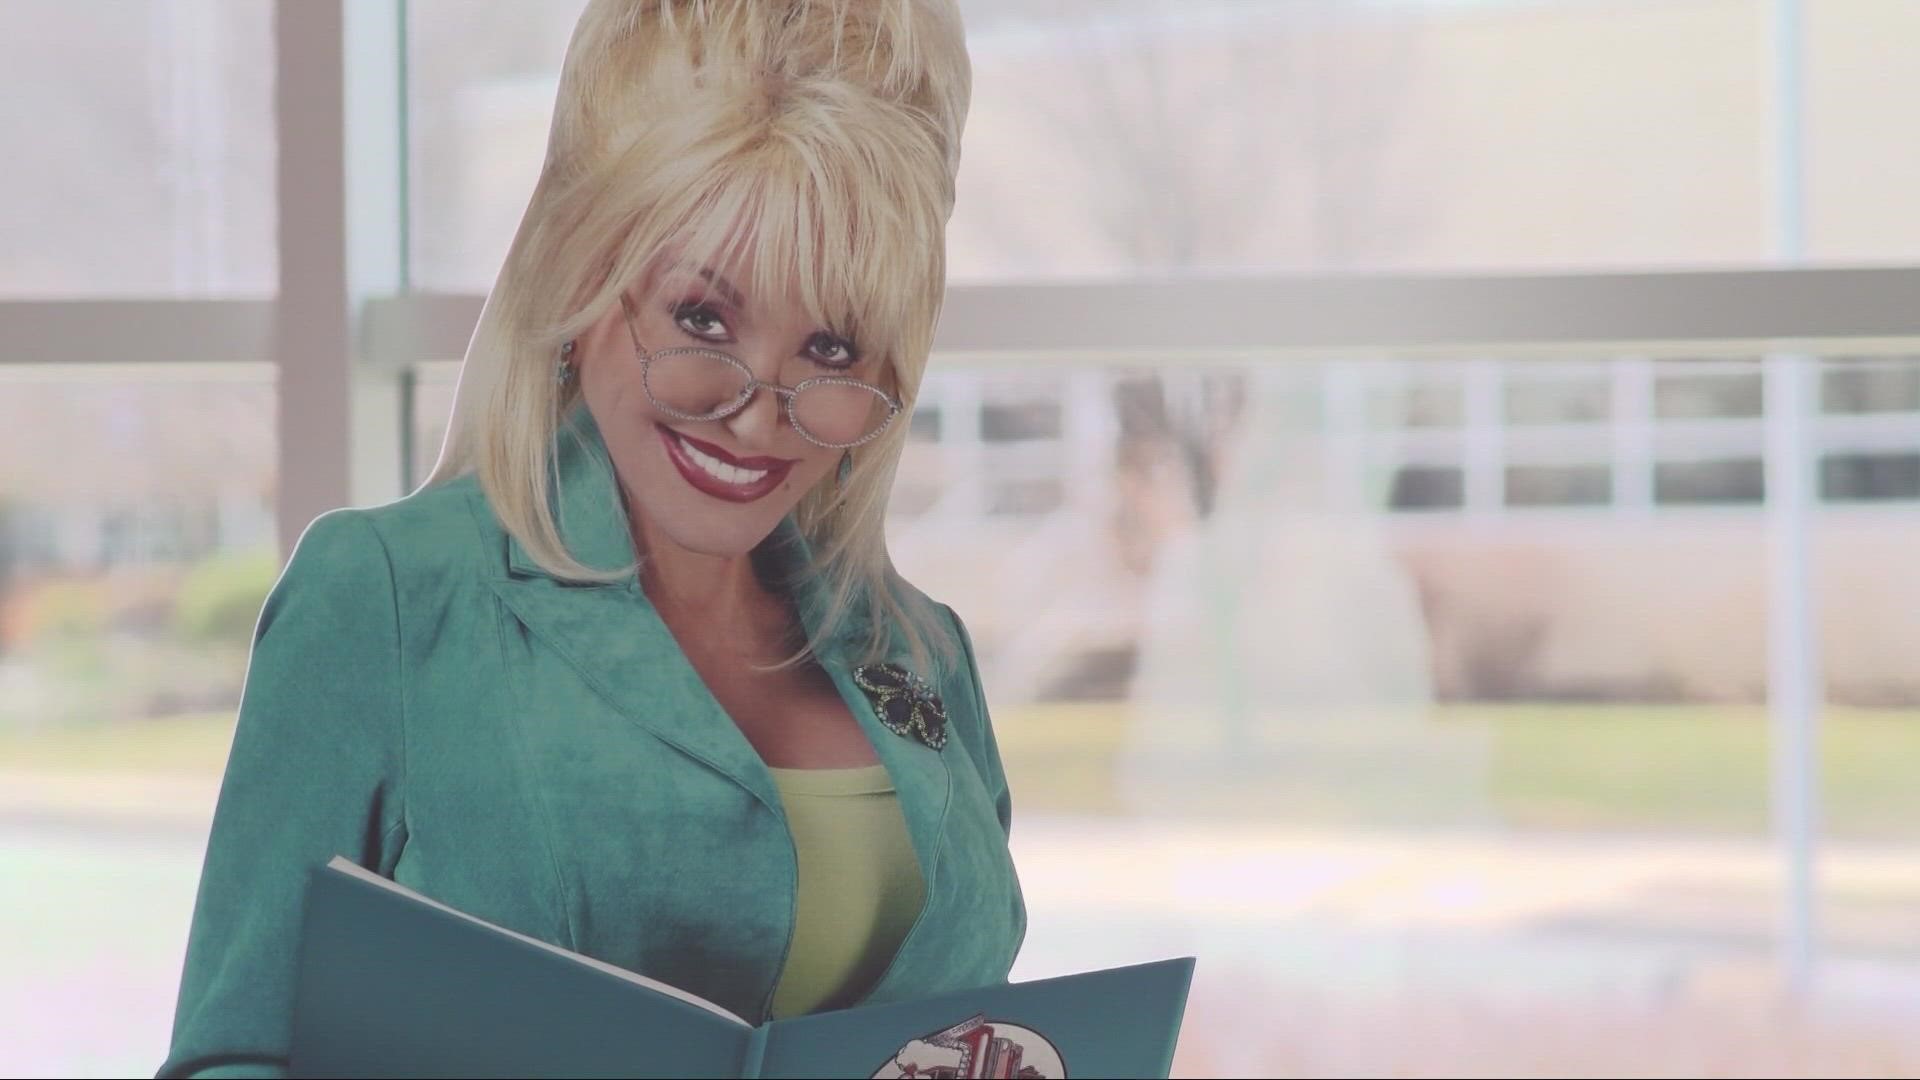 Gov. Mike DeWine declared Tuesday, Aug. 9 as honorary Dolly Parton Day as Parton made a  visit to Ohio.